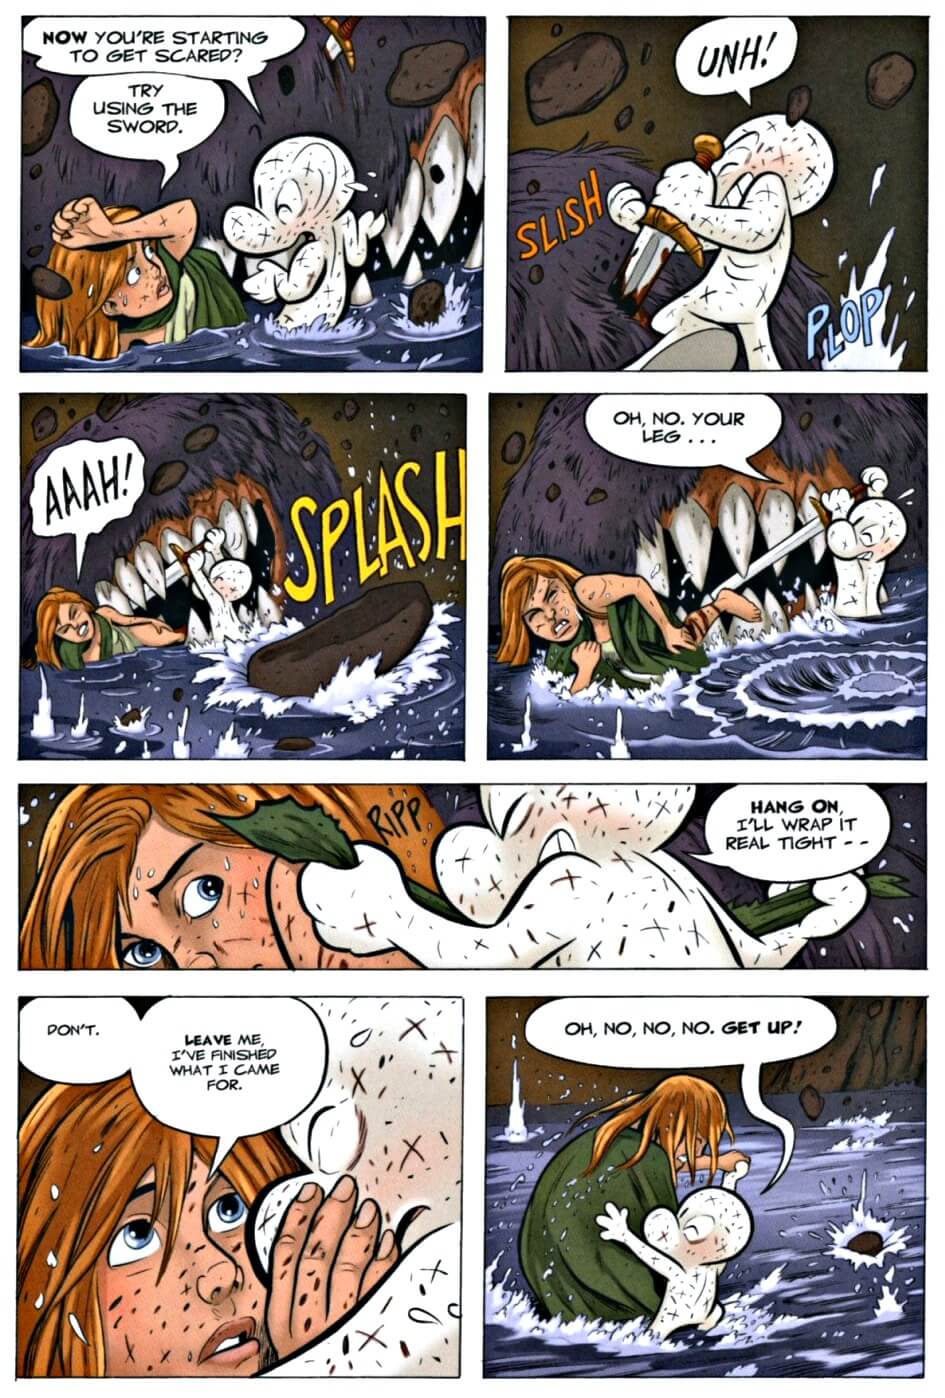 page 163 chapter 5 of bone 9 crown of horns graphic novel